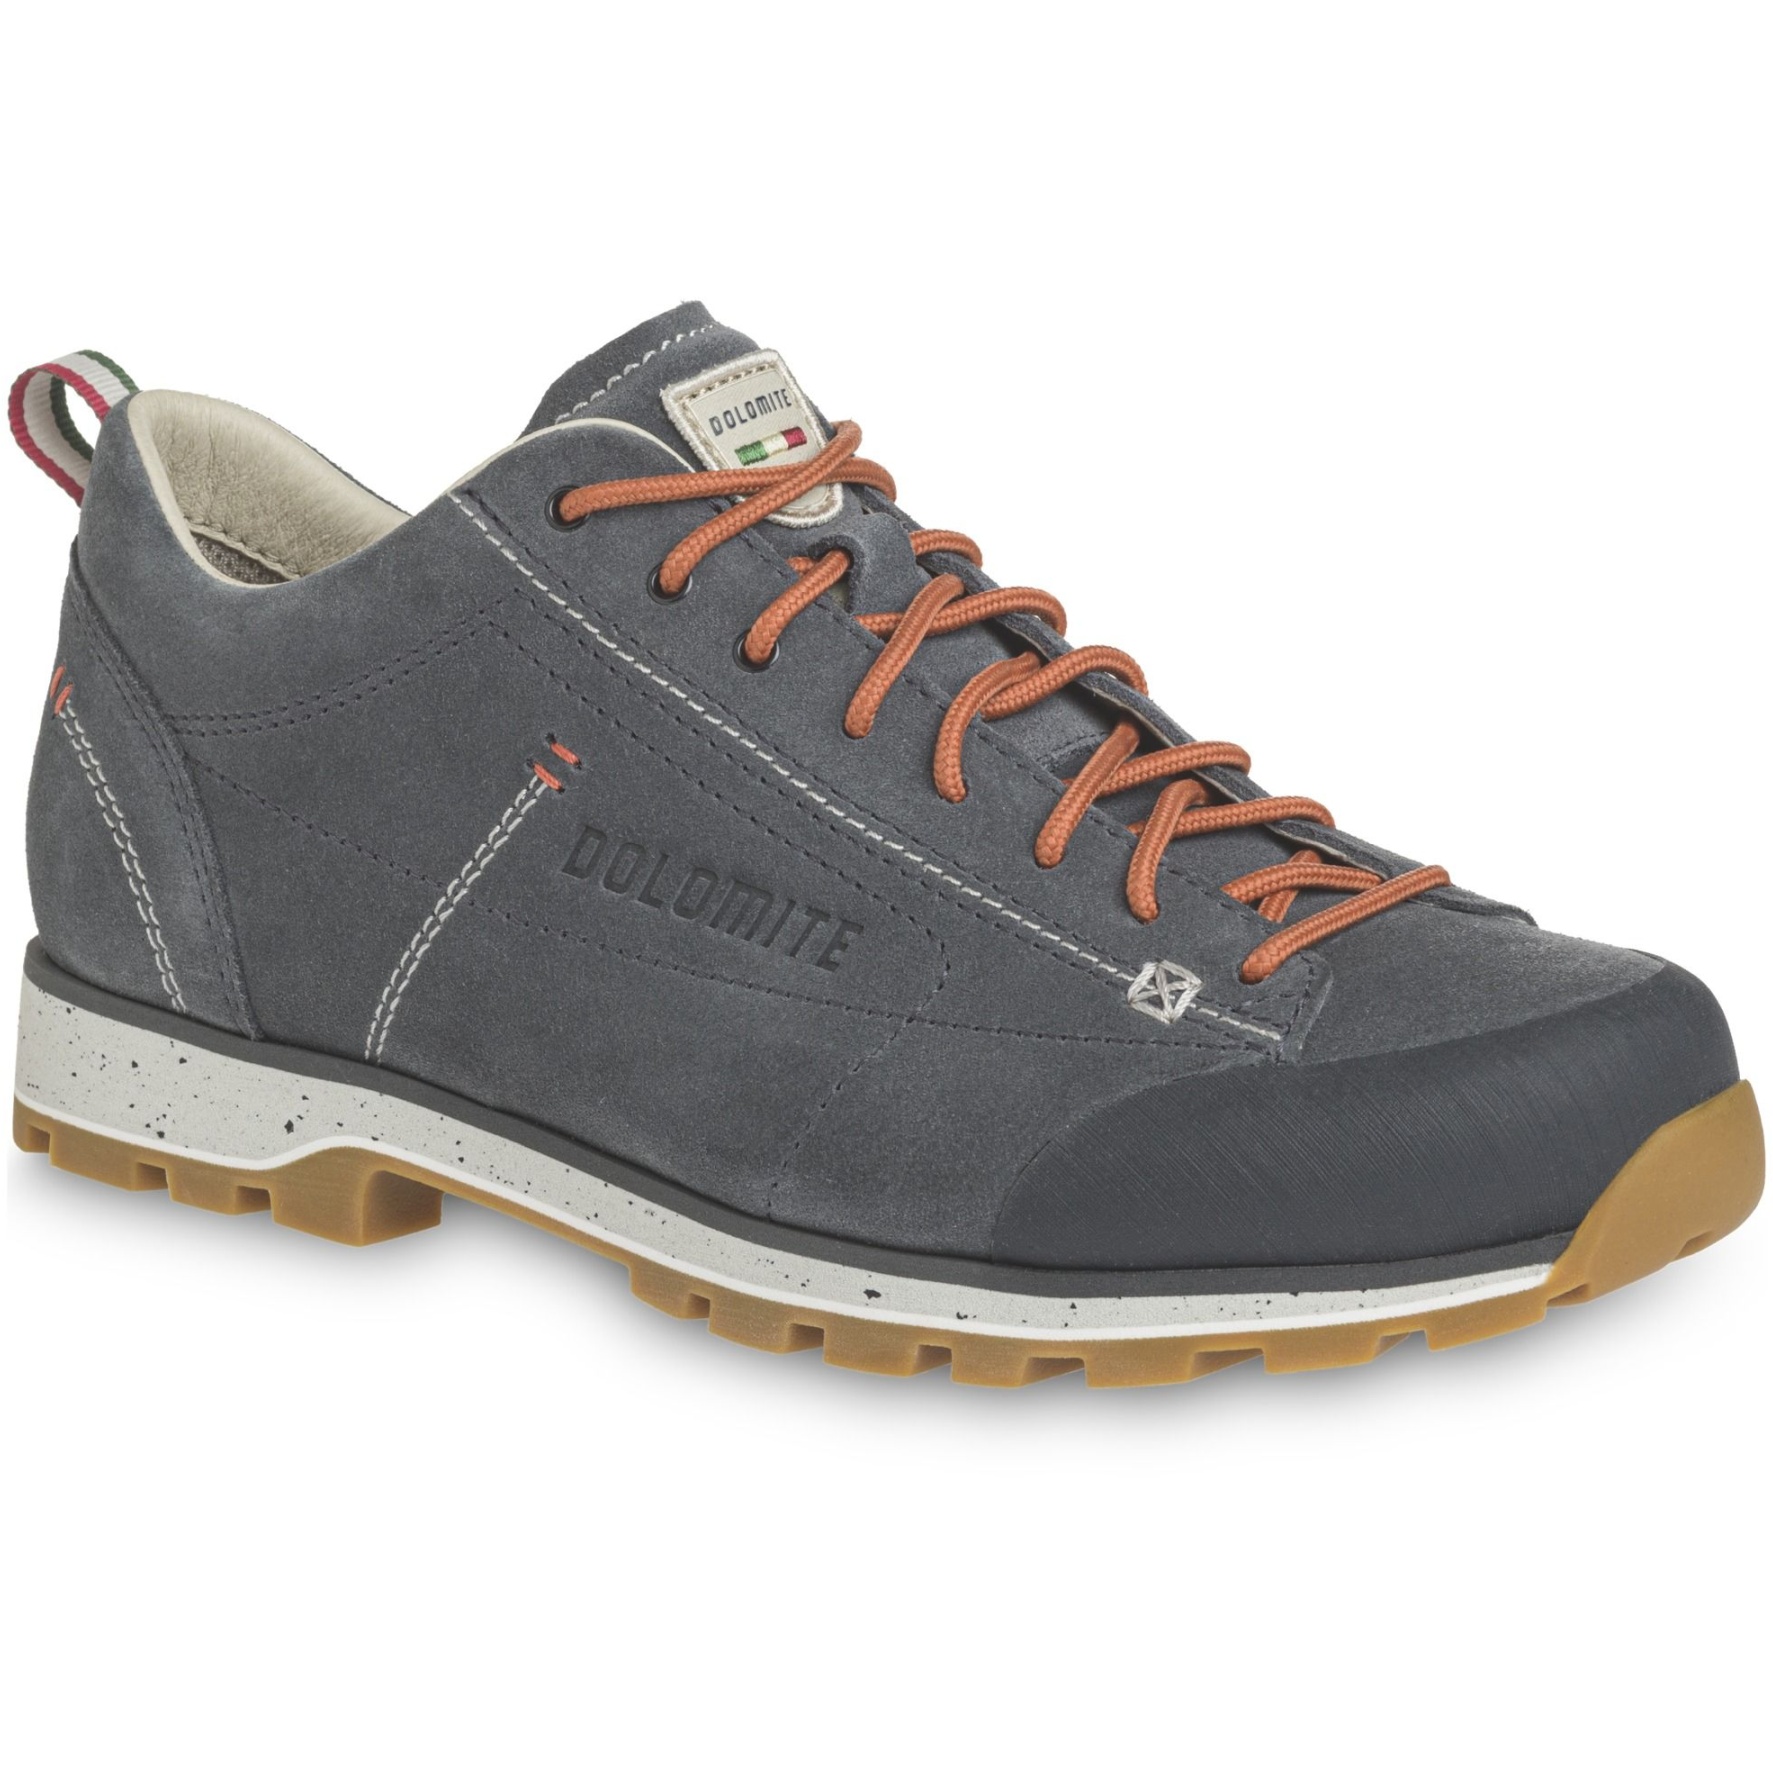 Picture of Dolomite 54 Low Evo Shoes Men - gunmetal grey/canapa beige